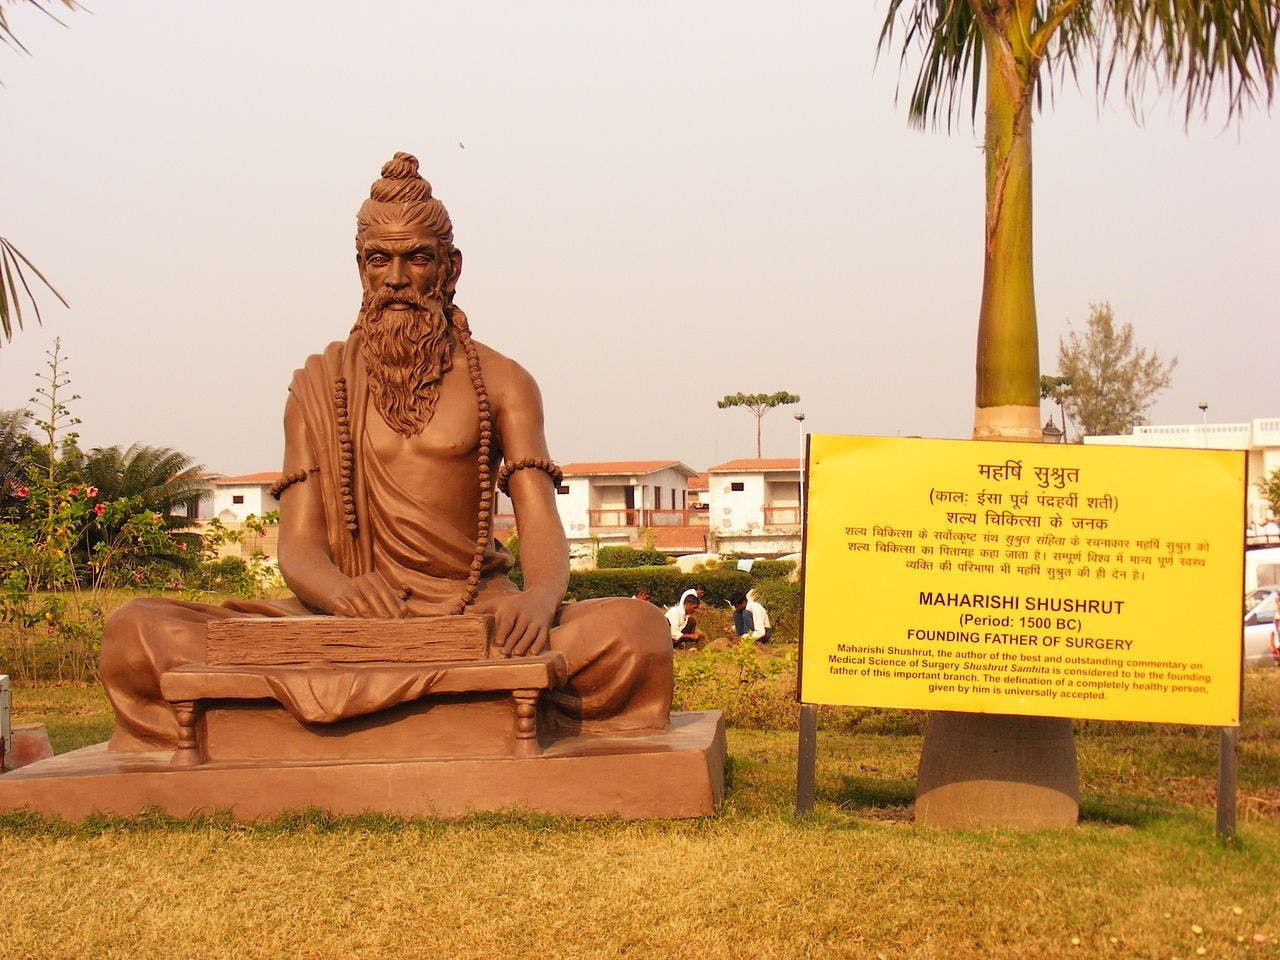 Sushruta, the father of Indian surgery